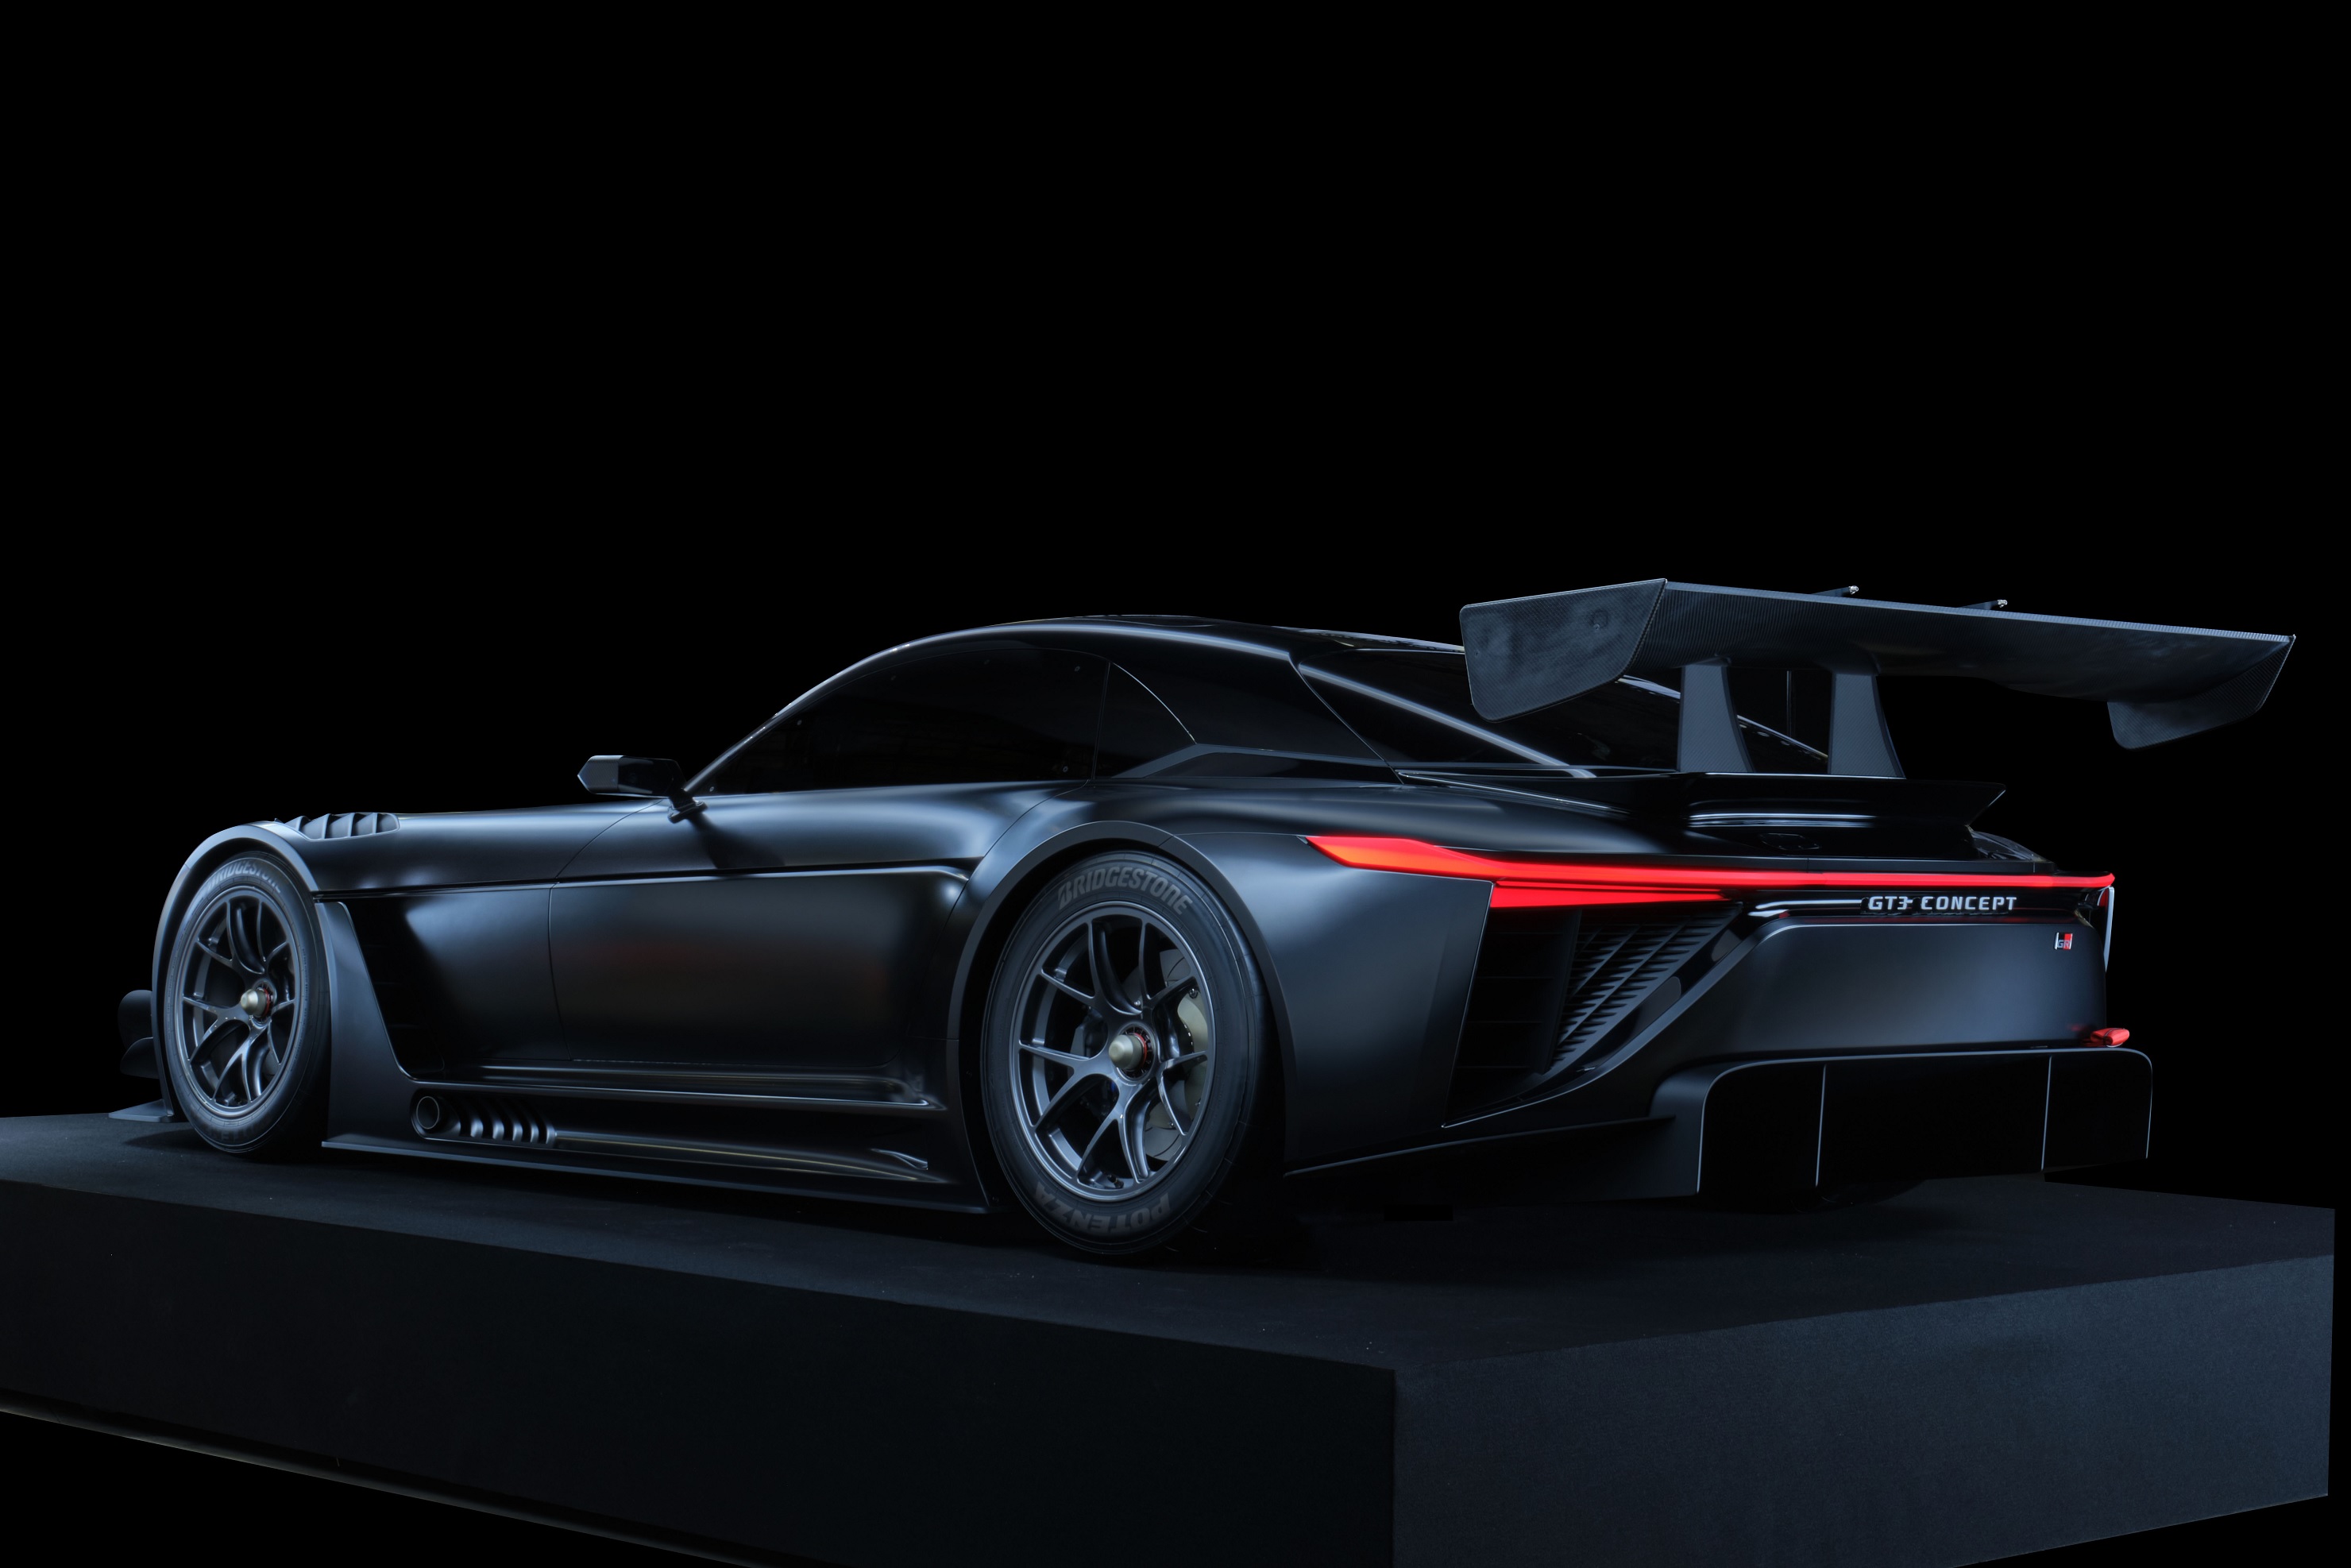 The rear view of the black 2022 Toyota GR GT3 Concept on a stand